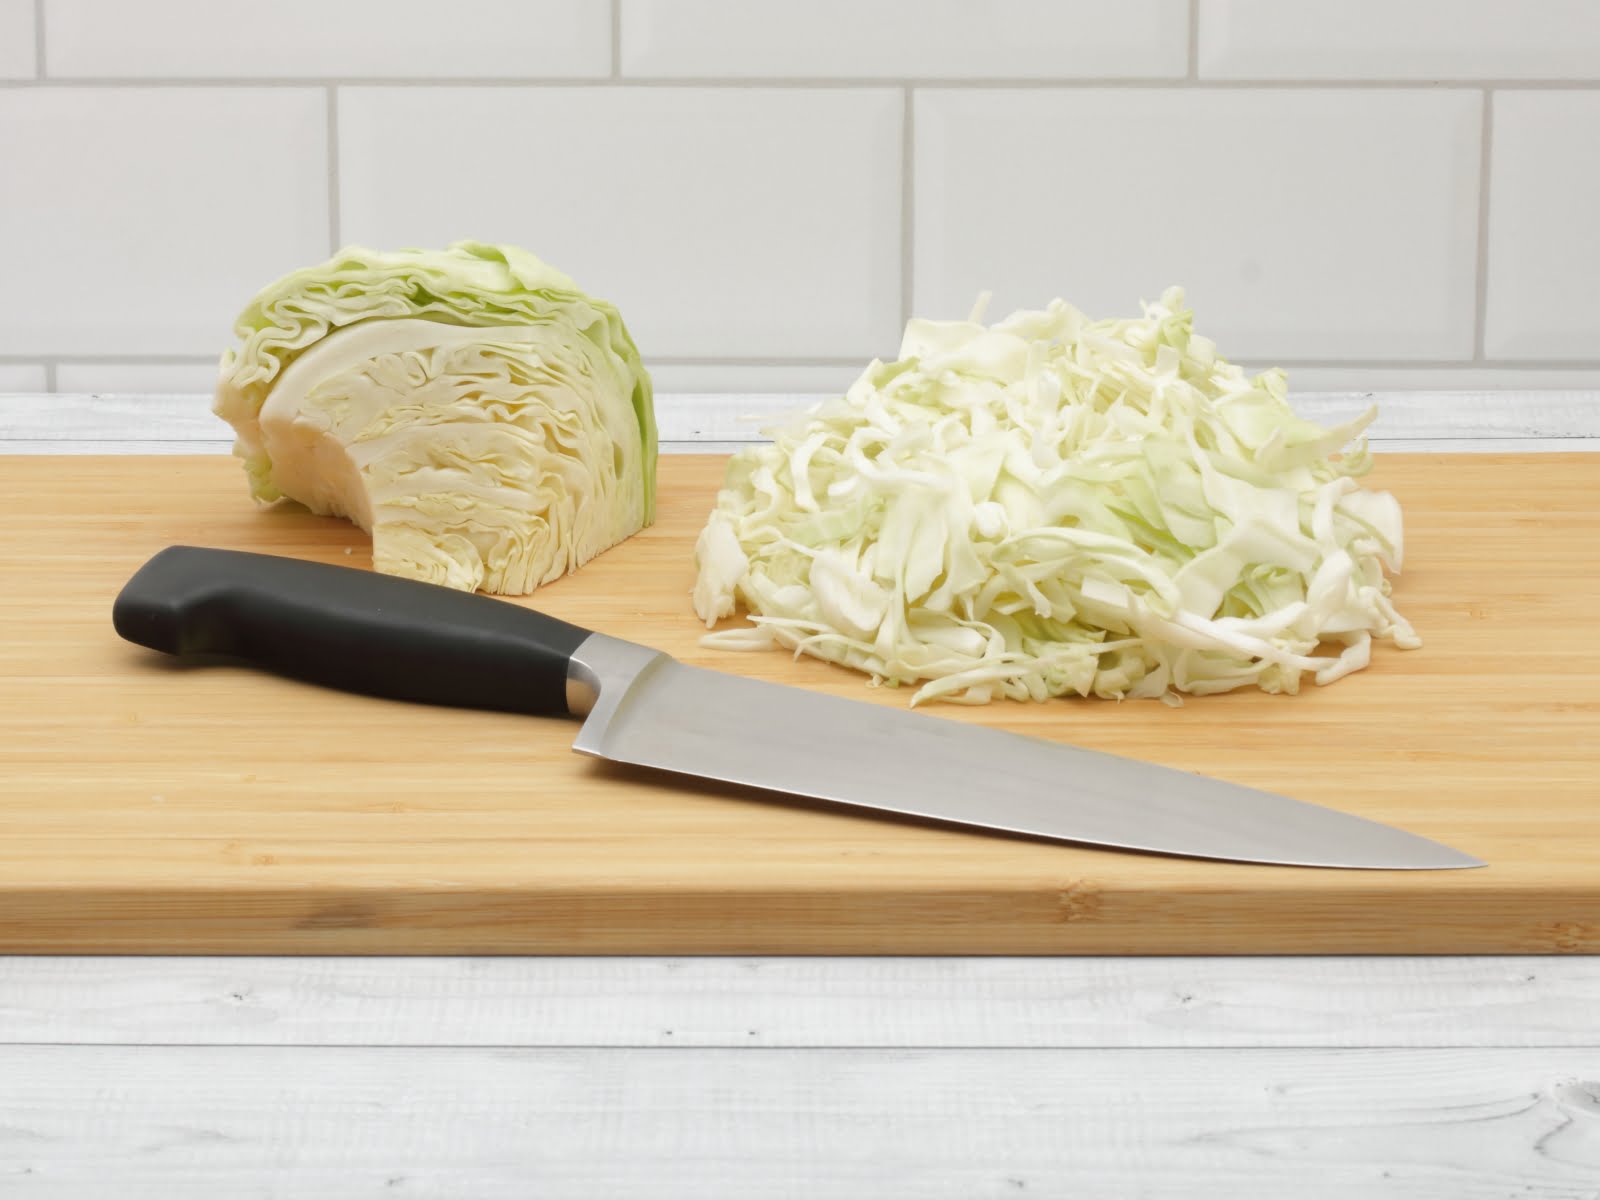 A simple sauerkraut recipe for beginners. Shredding cabbage with a knife.